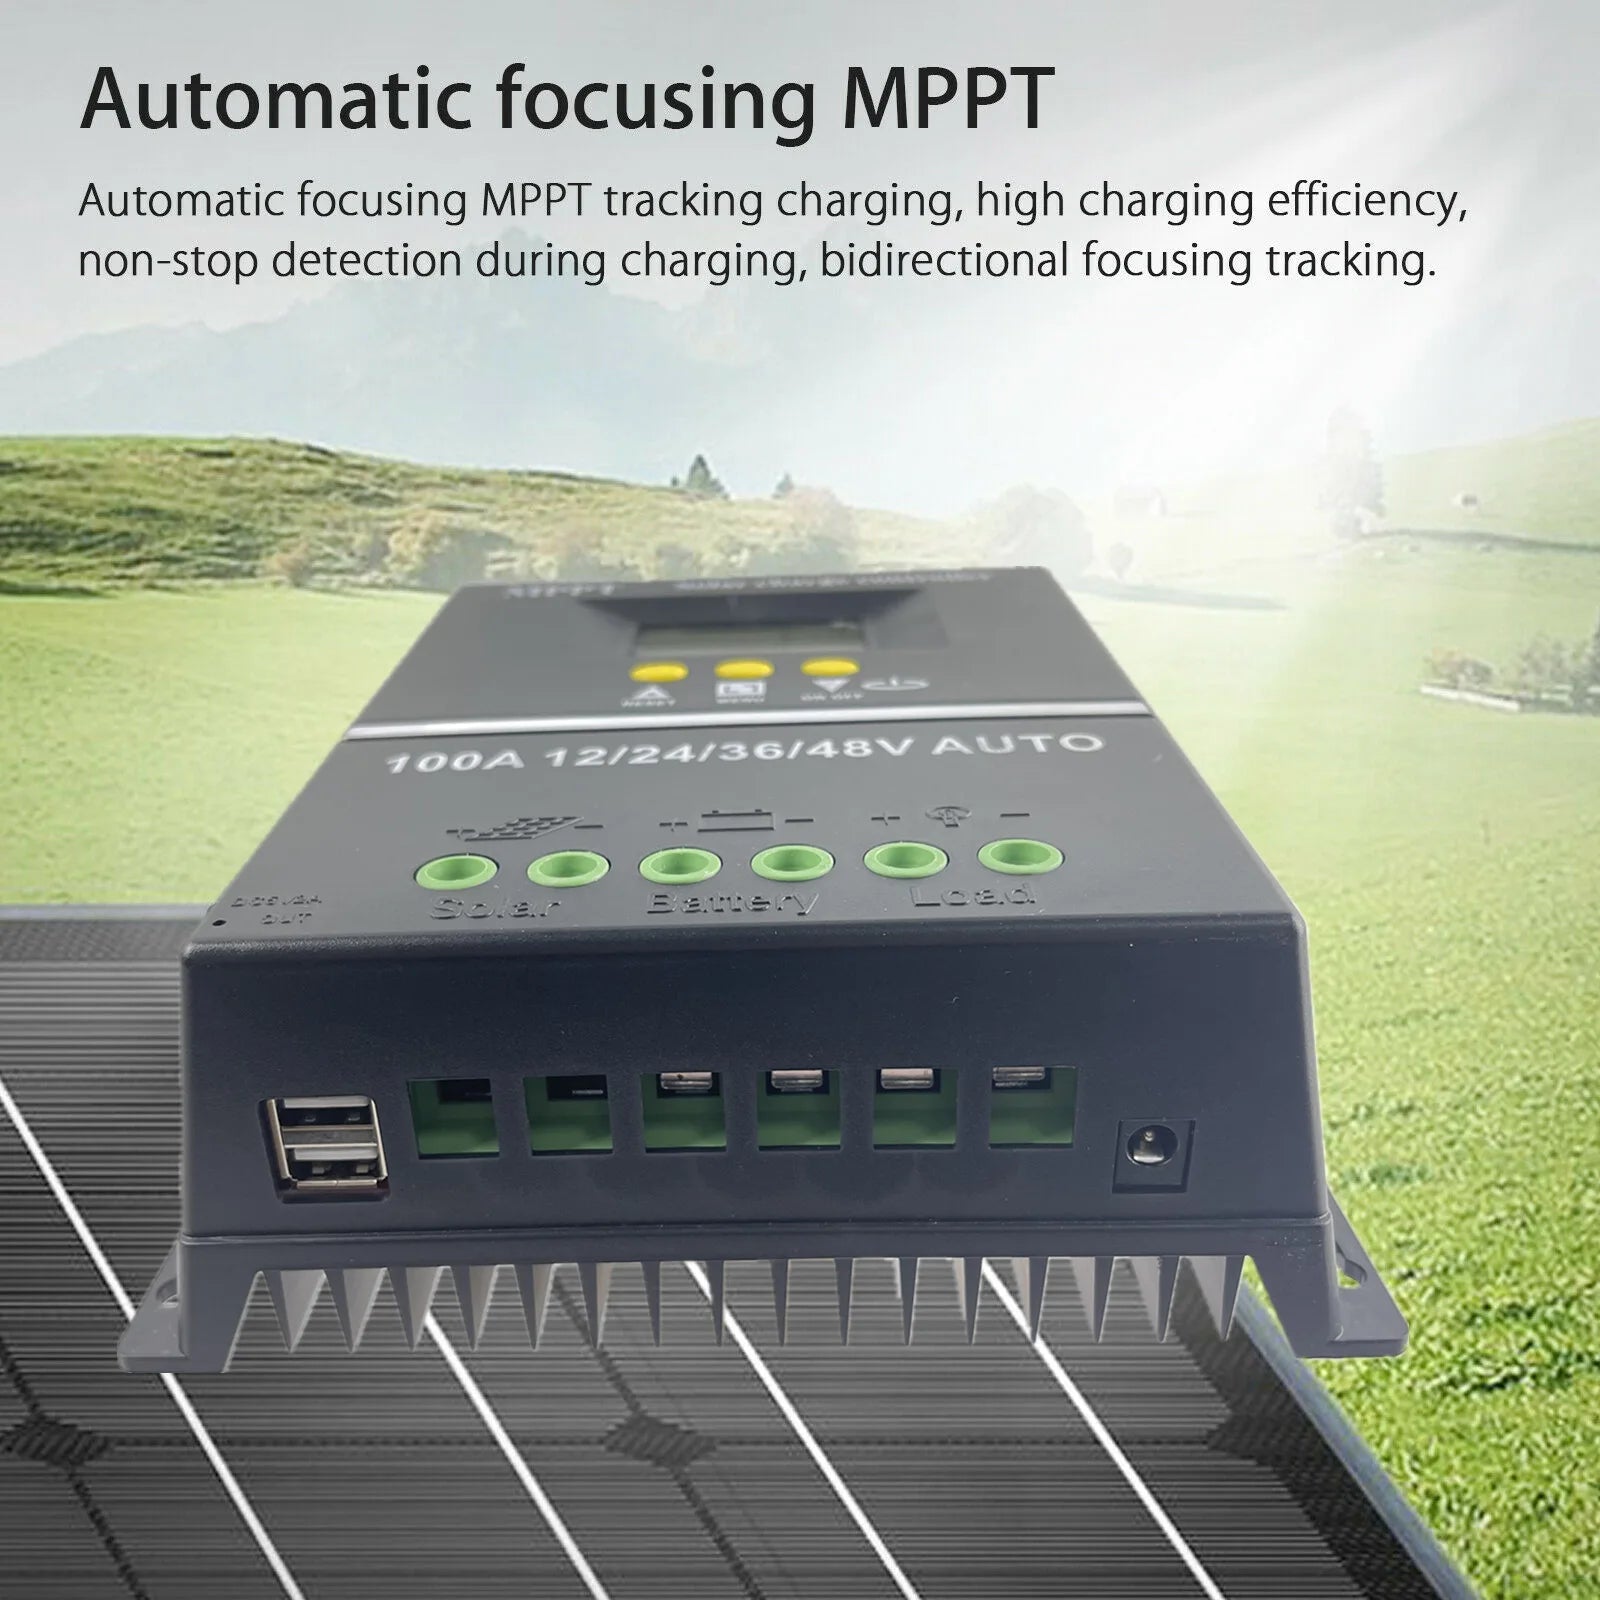 Advanced solar charge controller with automatic MPPT tracking for efficient energy harvesting.